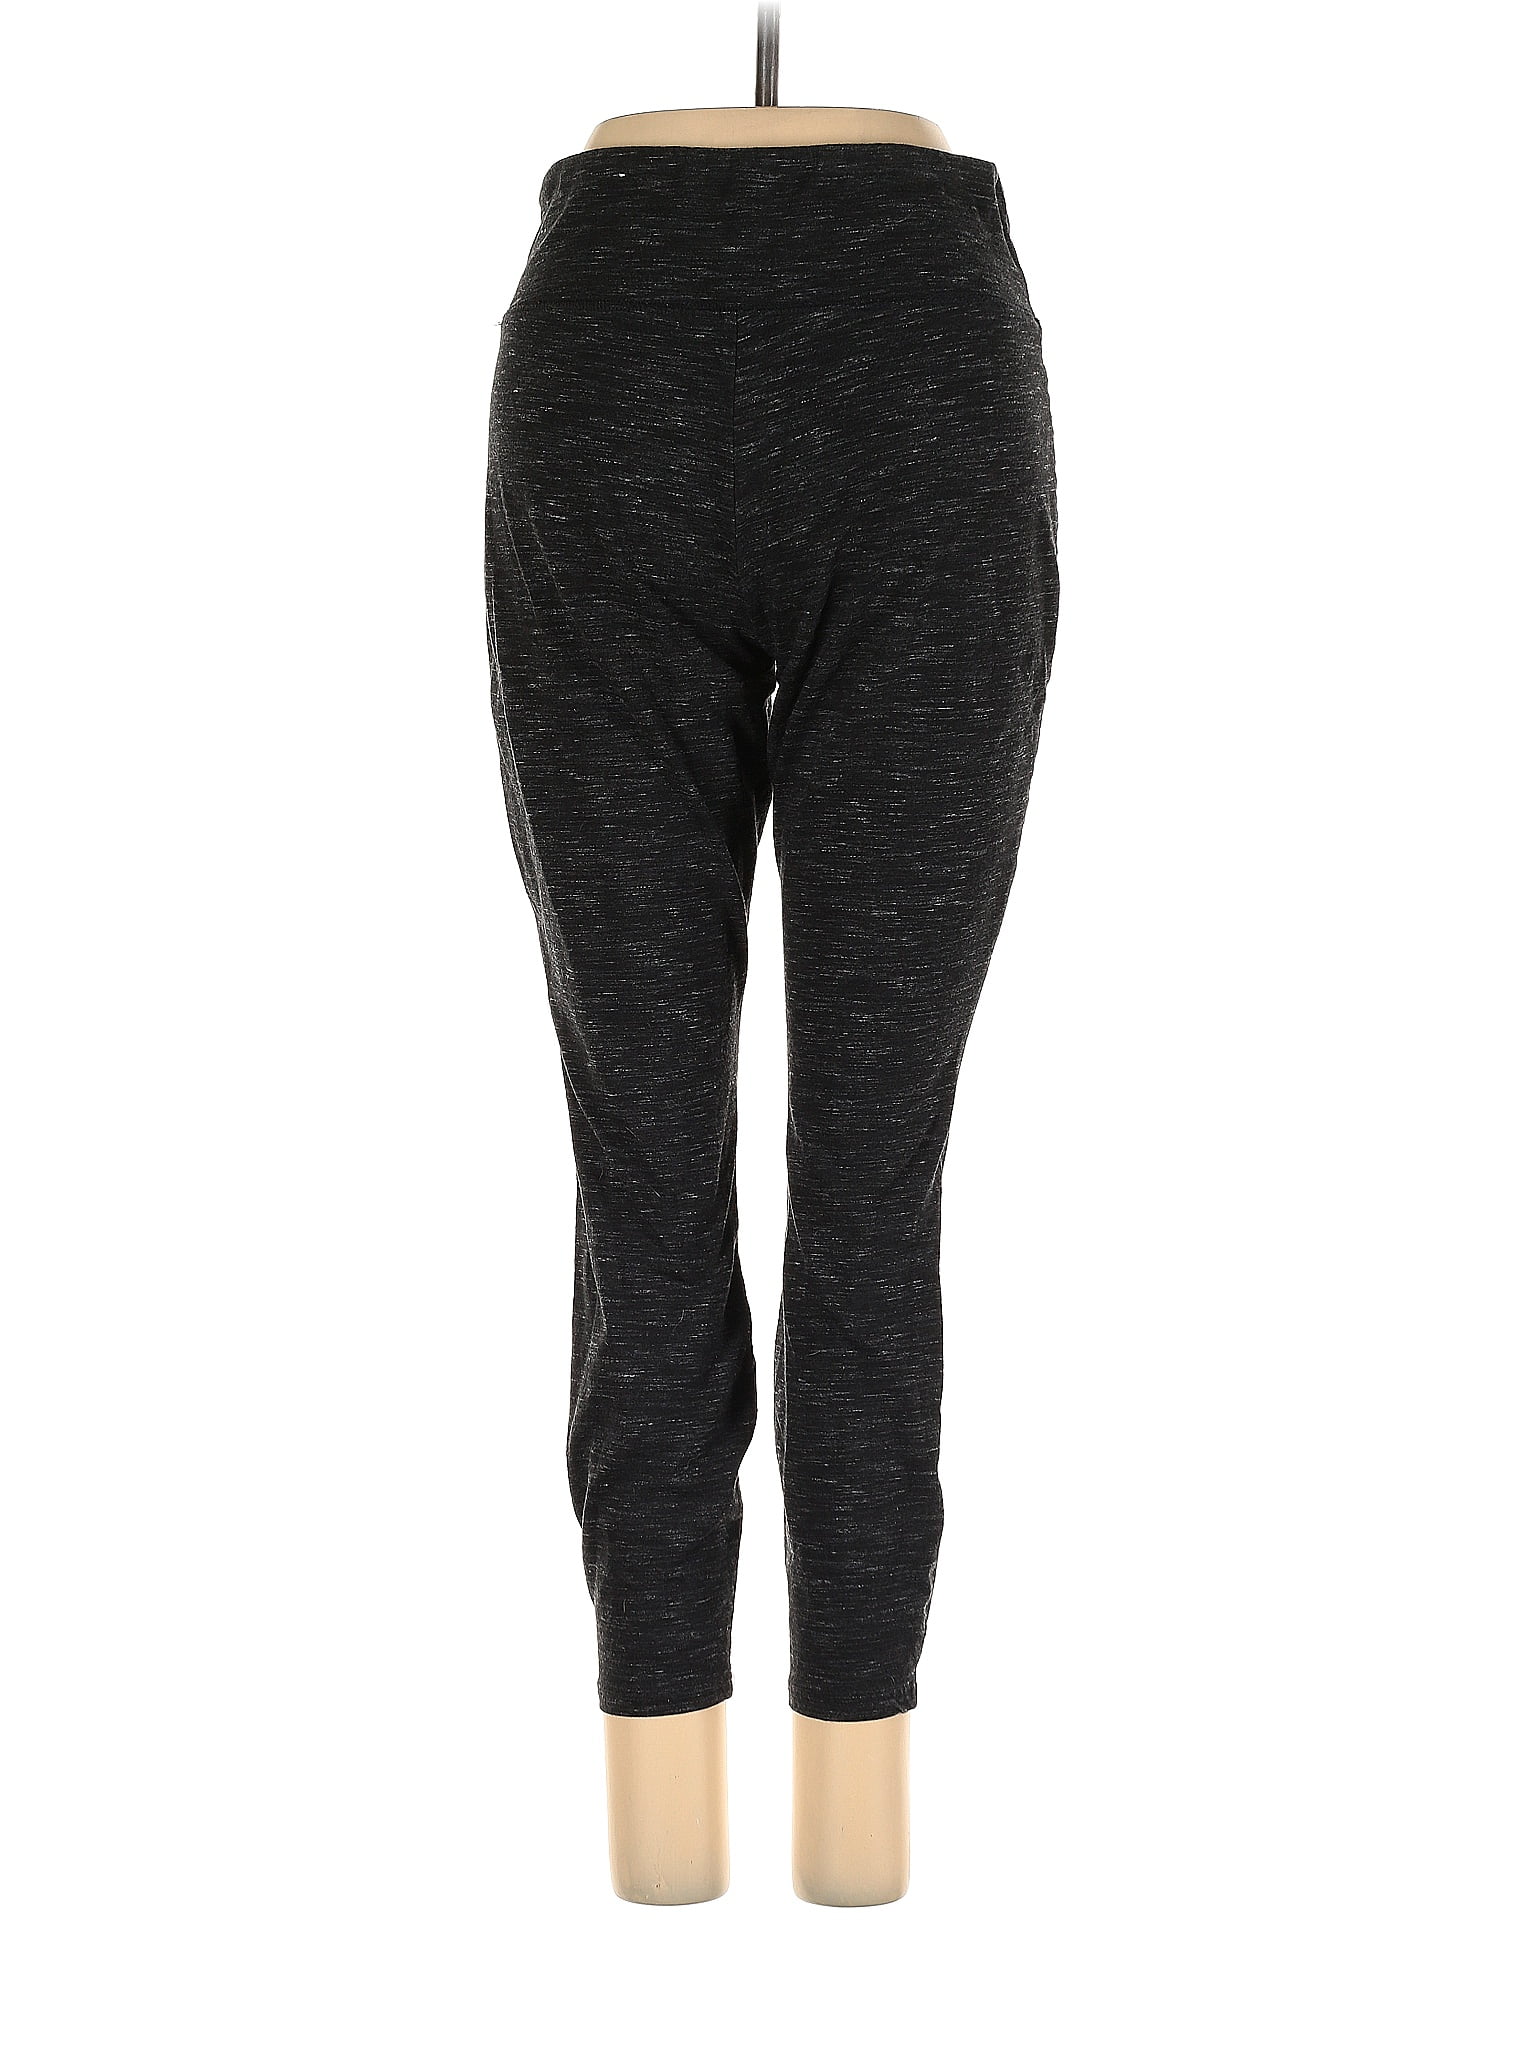 Mossimo Supply Co. Black Leggings Size S - 23% off